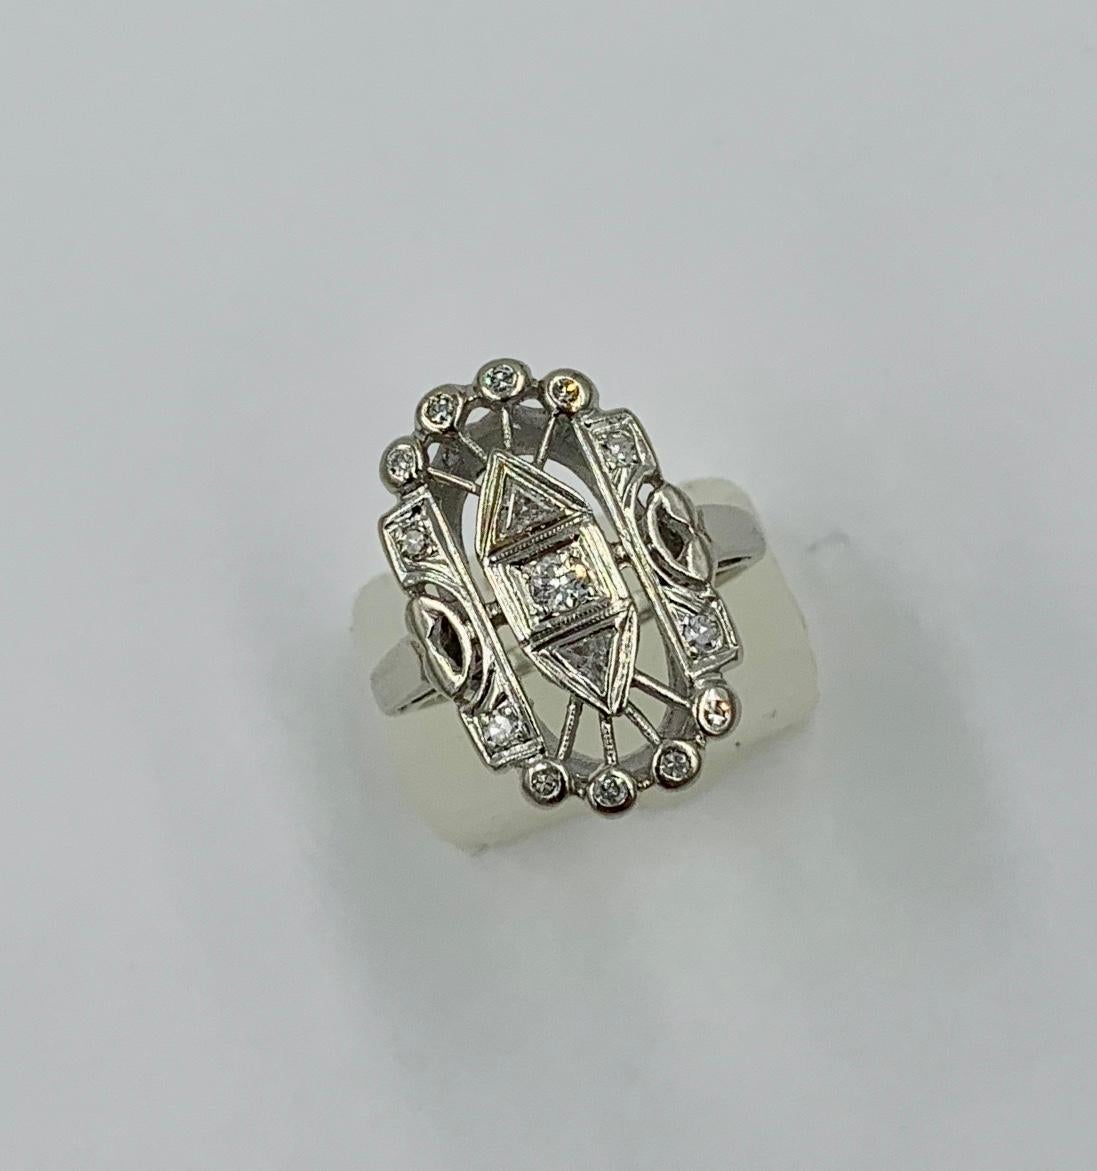 This is a stunning Art Deco style Diamond Ring with Trillion Cut Diamonds in a 14 Karat White Gold Open Work setting of great beauty.  The ring is such a special Art Deco style Jewel and rings with cutting edge Art Deco design are rare and highly